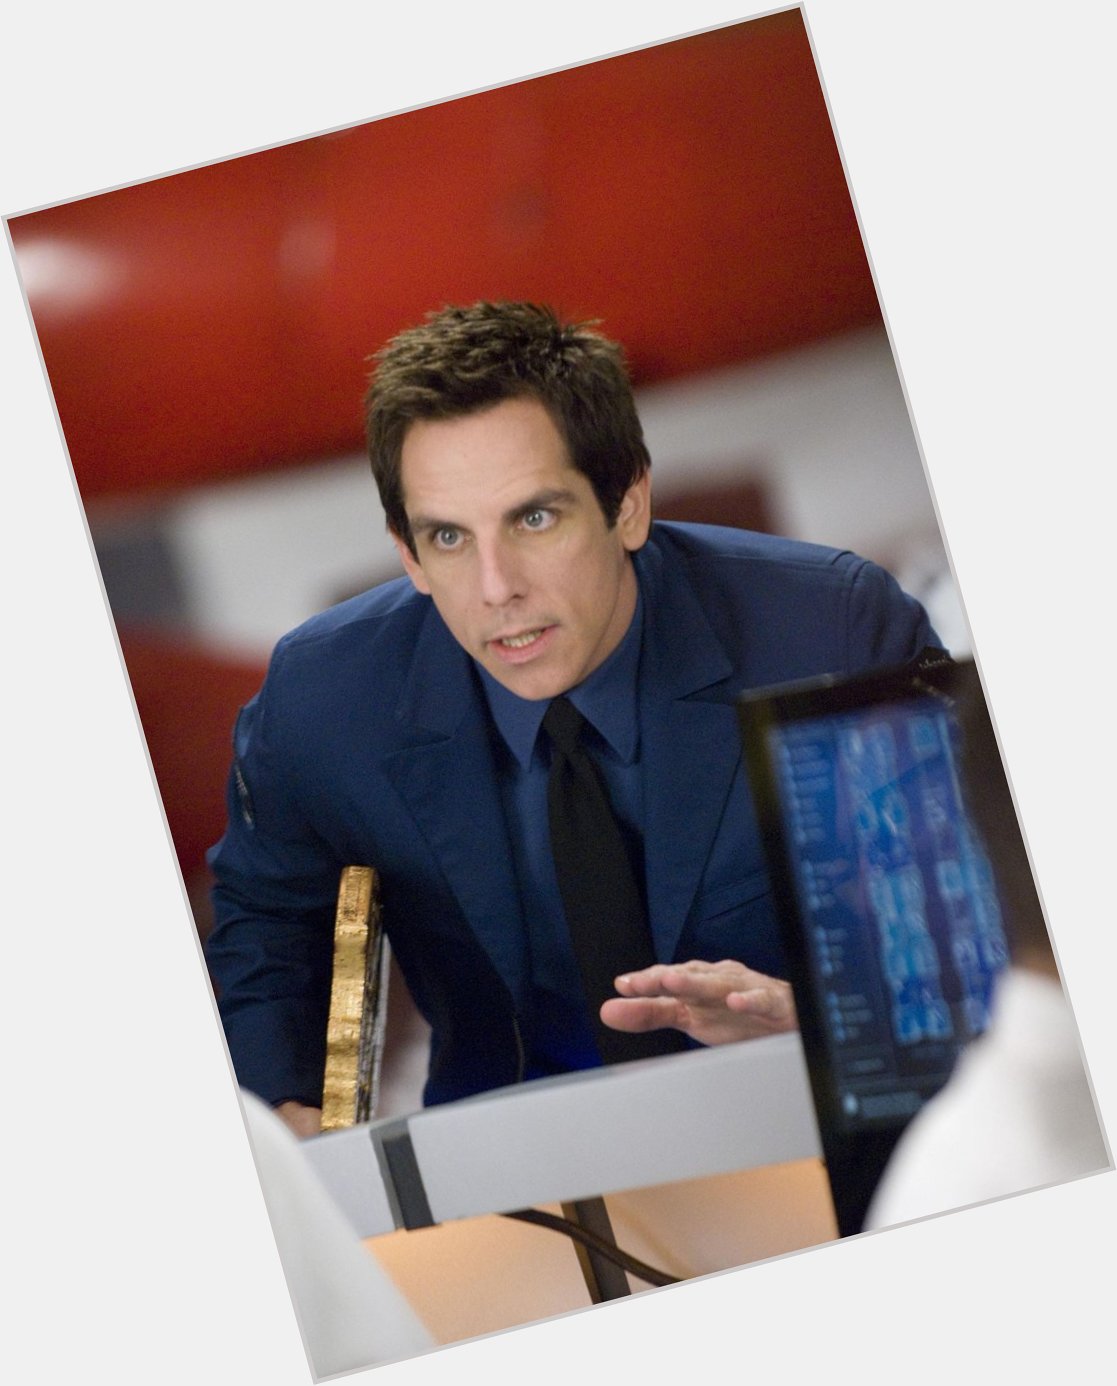 Ben Stiller - Youve got an endless list of amazing films, from comedies to more serious roles

A BIG happy birthday! 